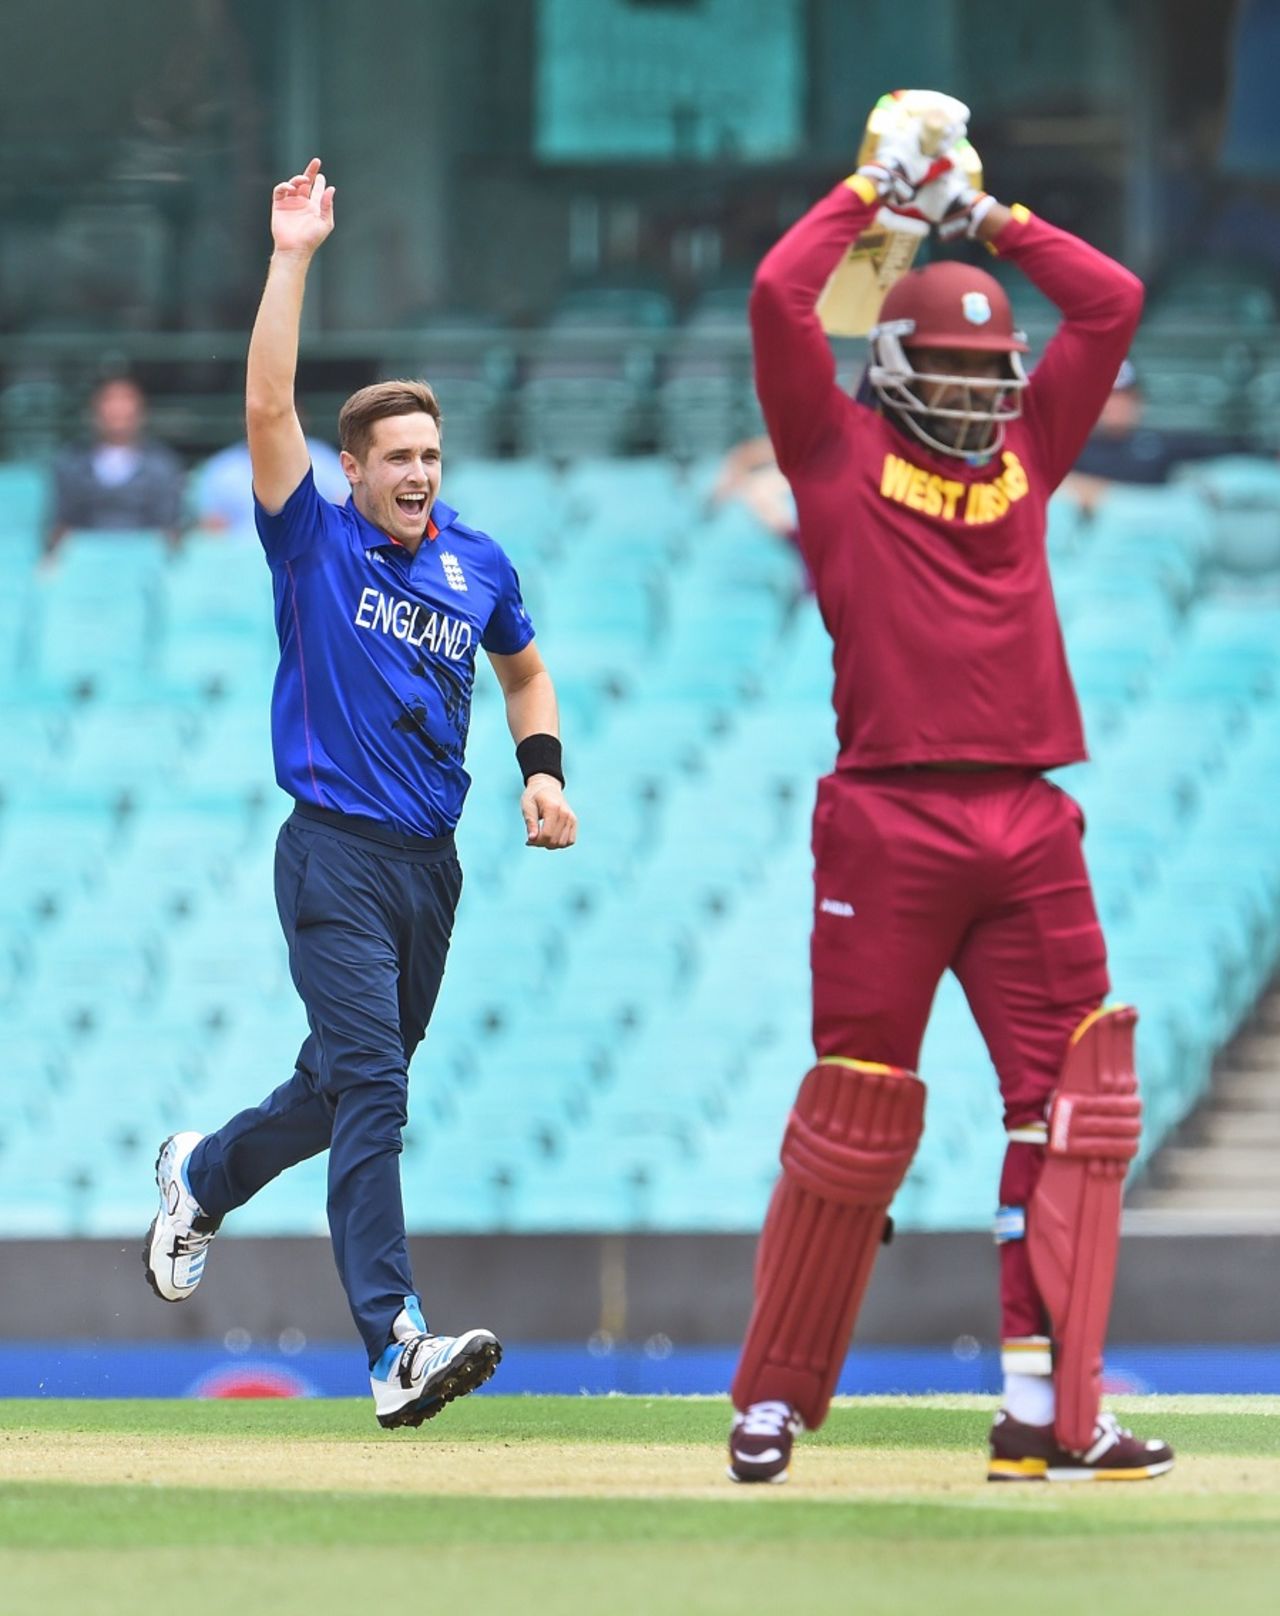 Chris Woakes dismissed Chris Gayle for a golden duck, England v West Indies, World Cup warm-up match, Sydney, February 9, 2015 